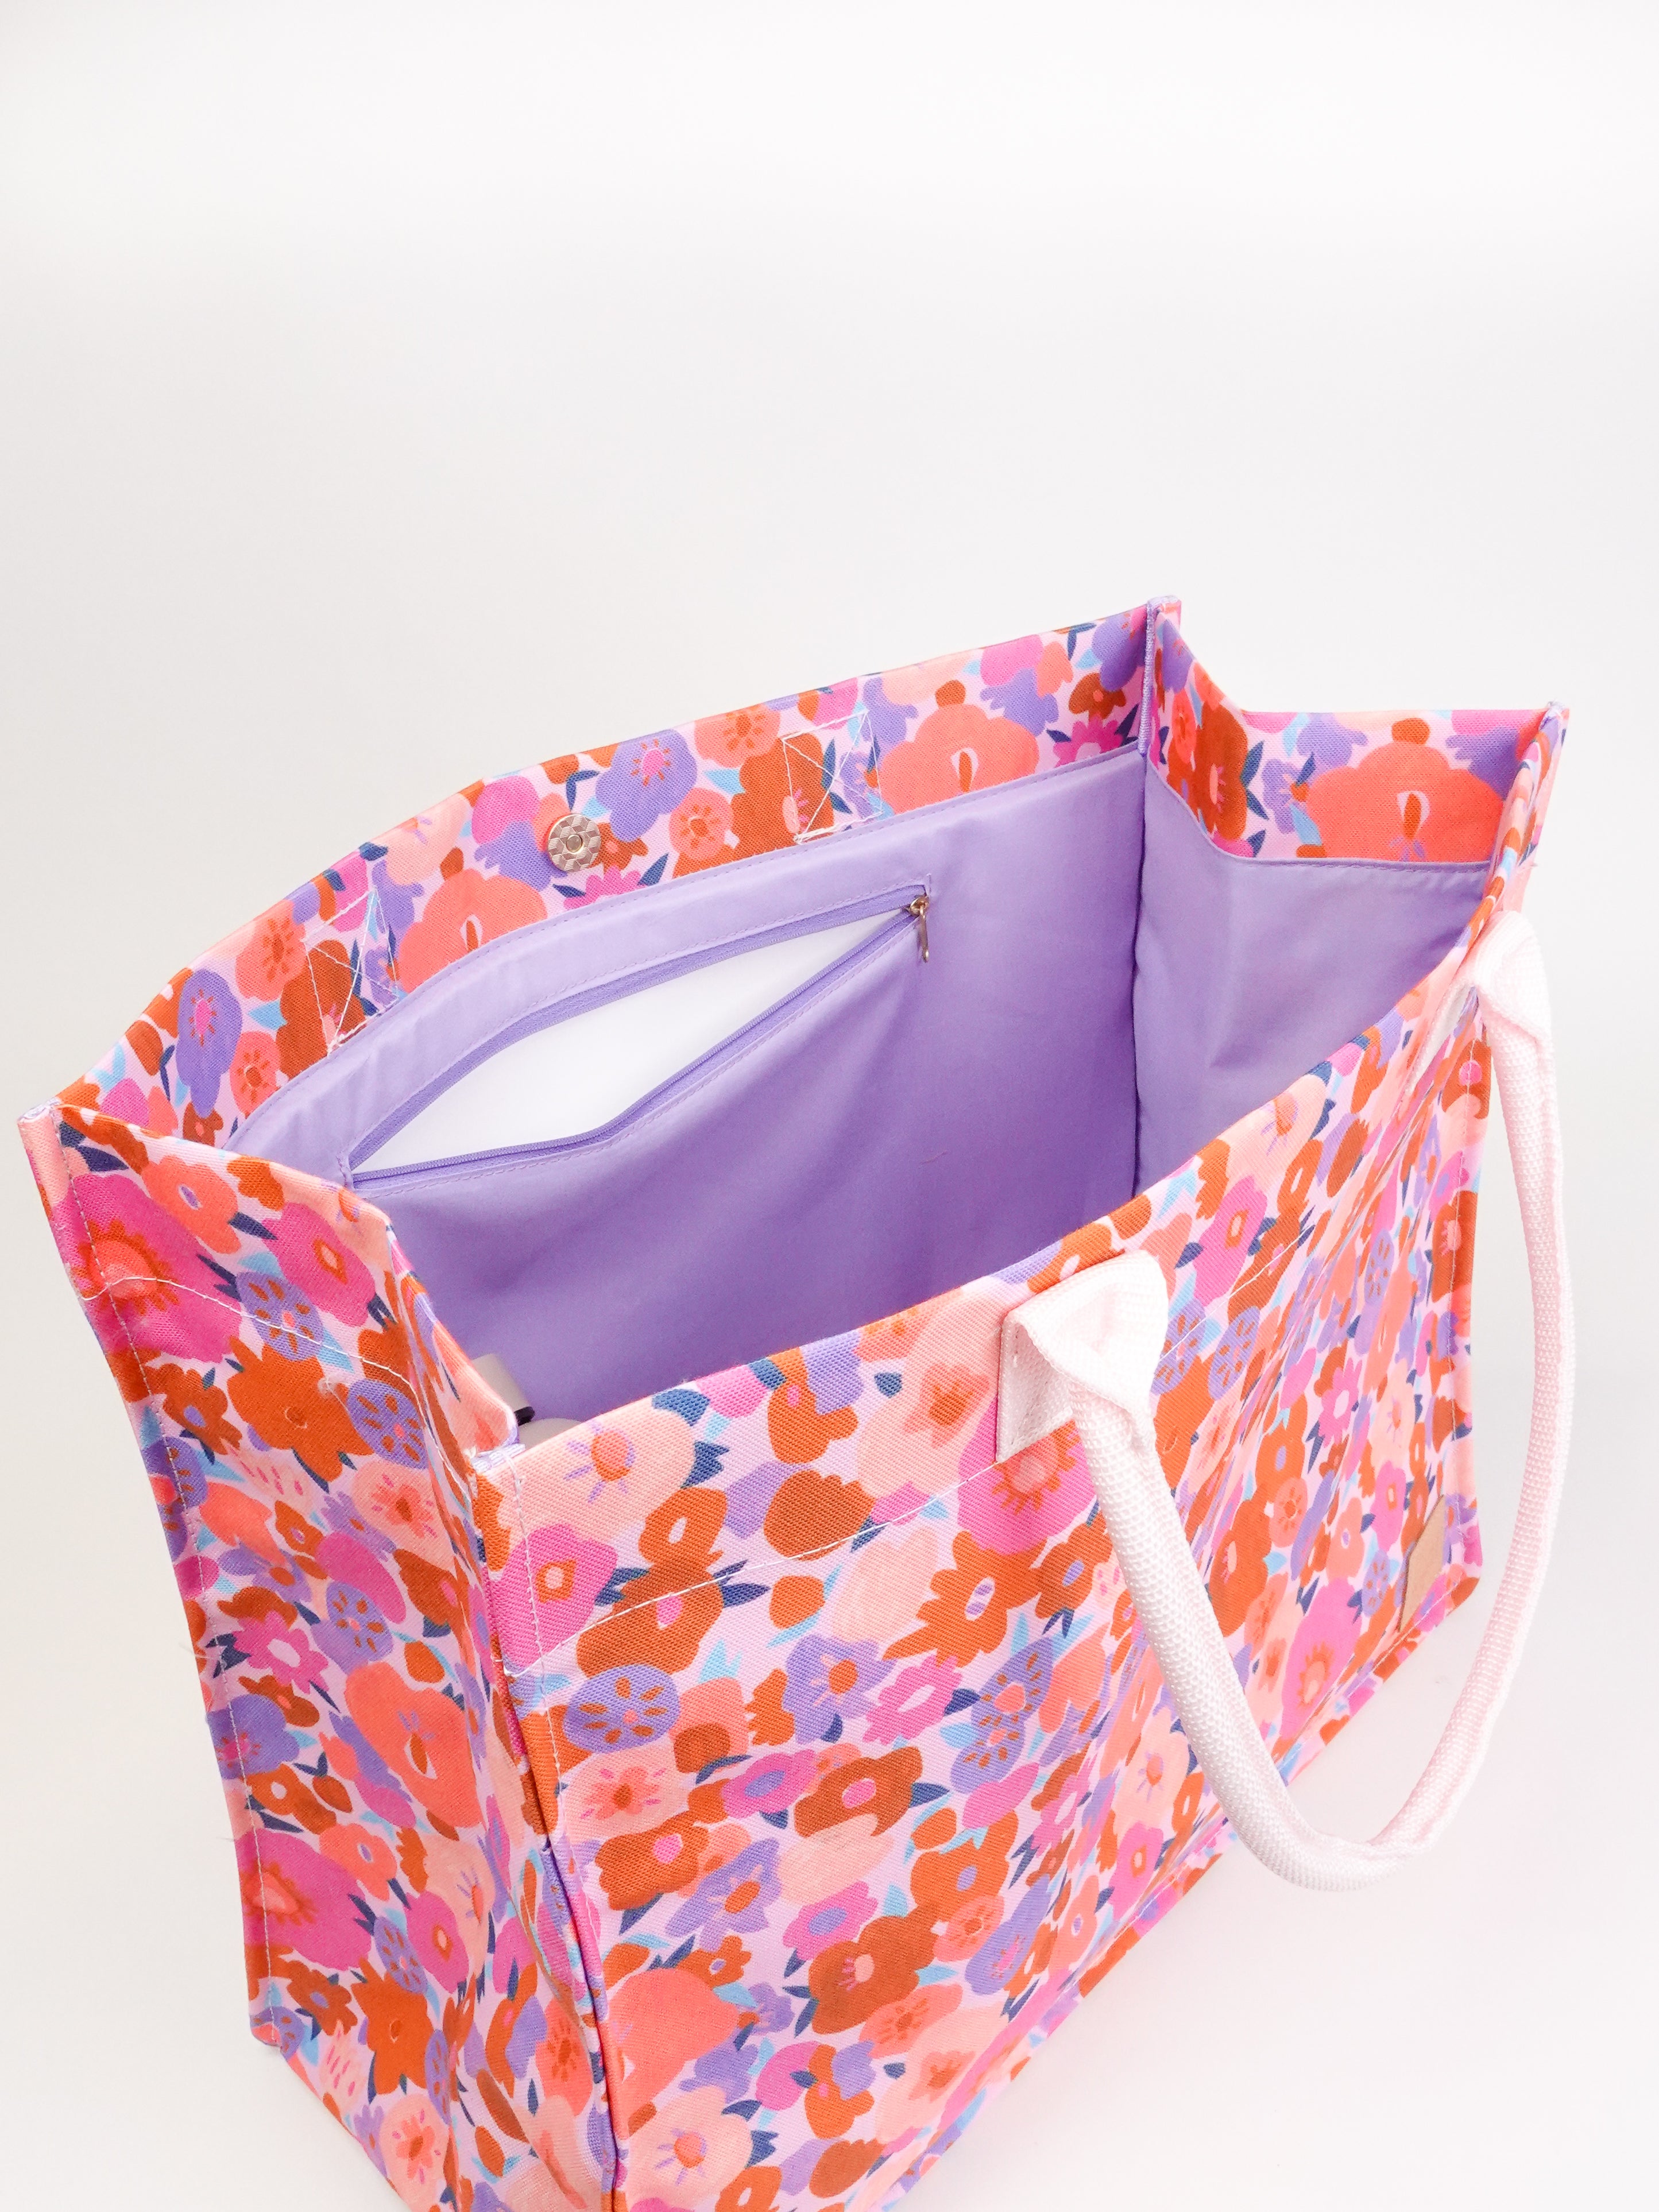 Sunkissed Ultimate Tote Bag